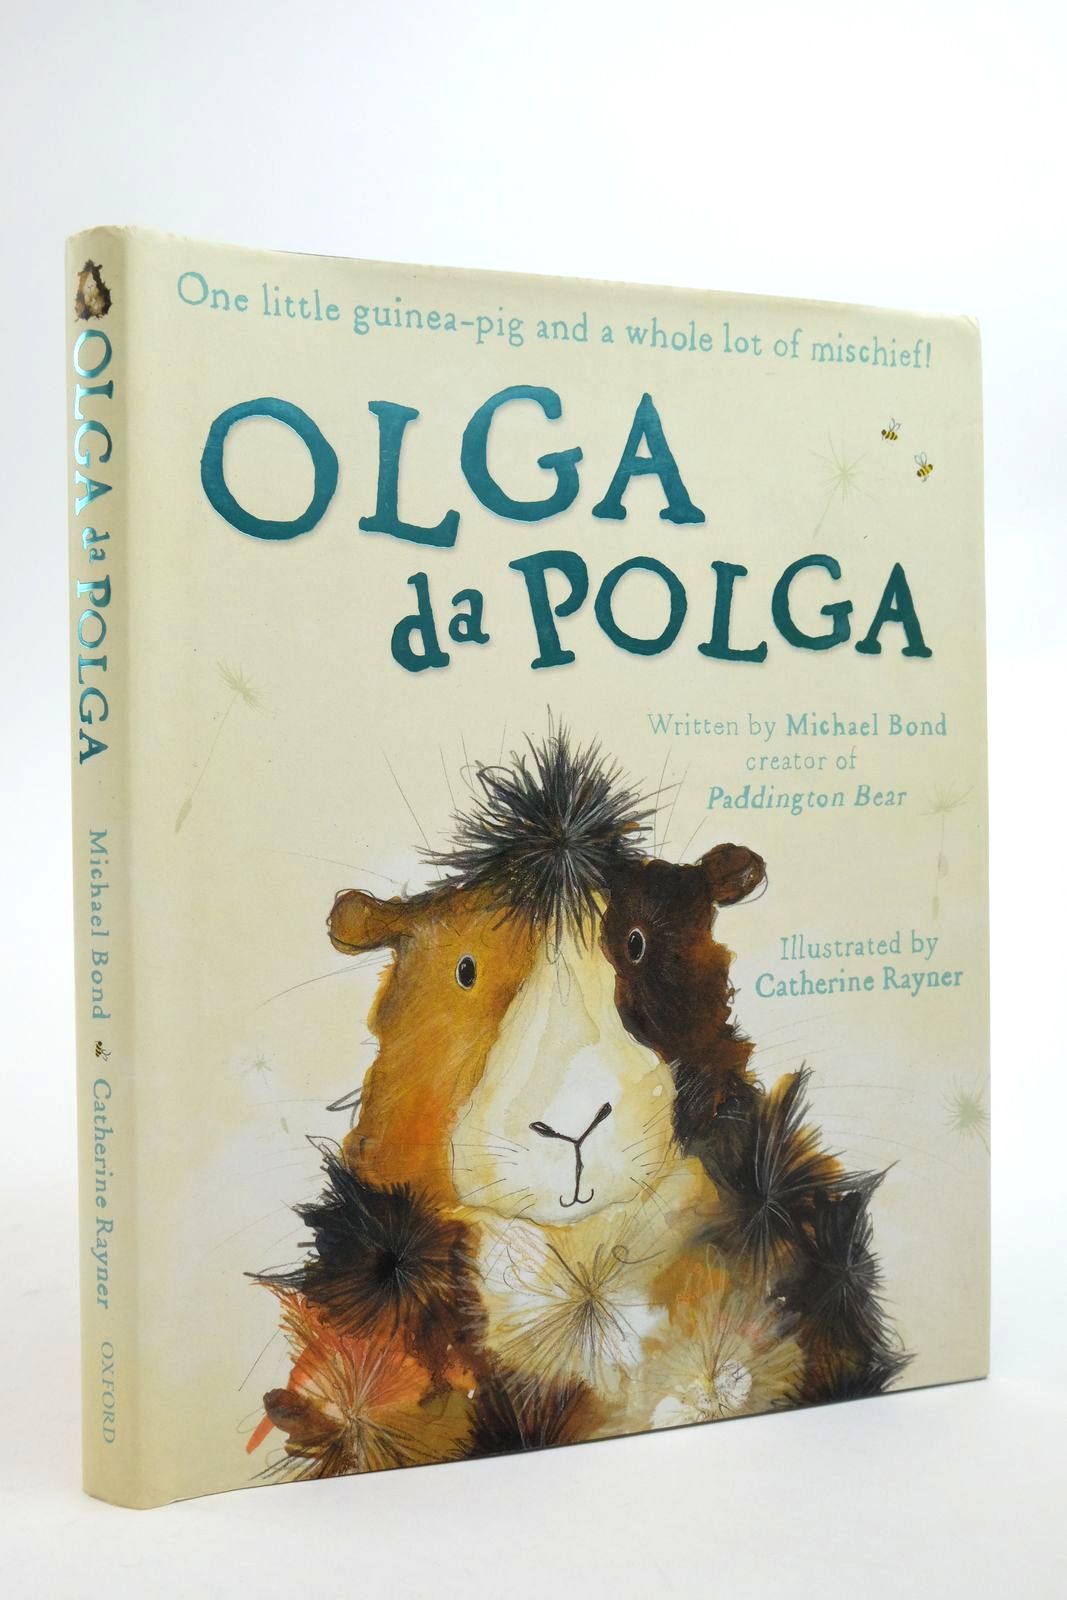 Photo of OLGA DA POLGA written by Bond, Michael illustrated by Rayner, Catherine published by Oxford University Press (STOCK CODE: 2138843)  for sale by Stella & Rose's Books